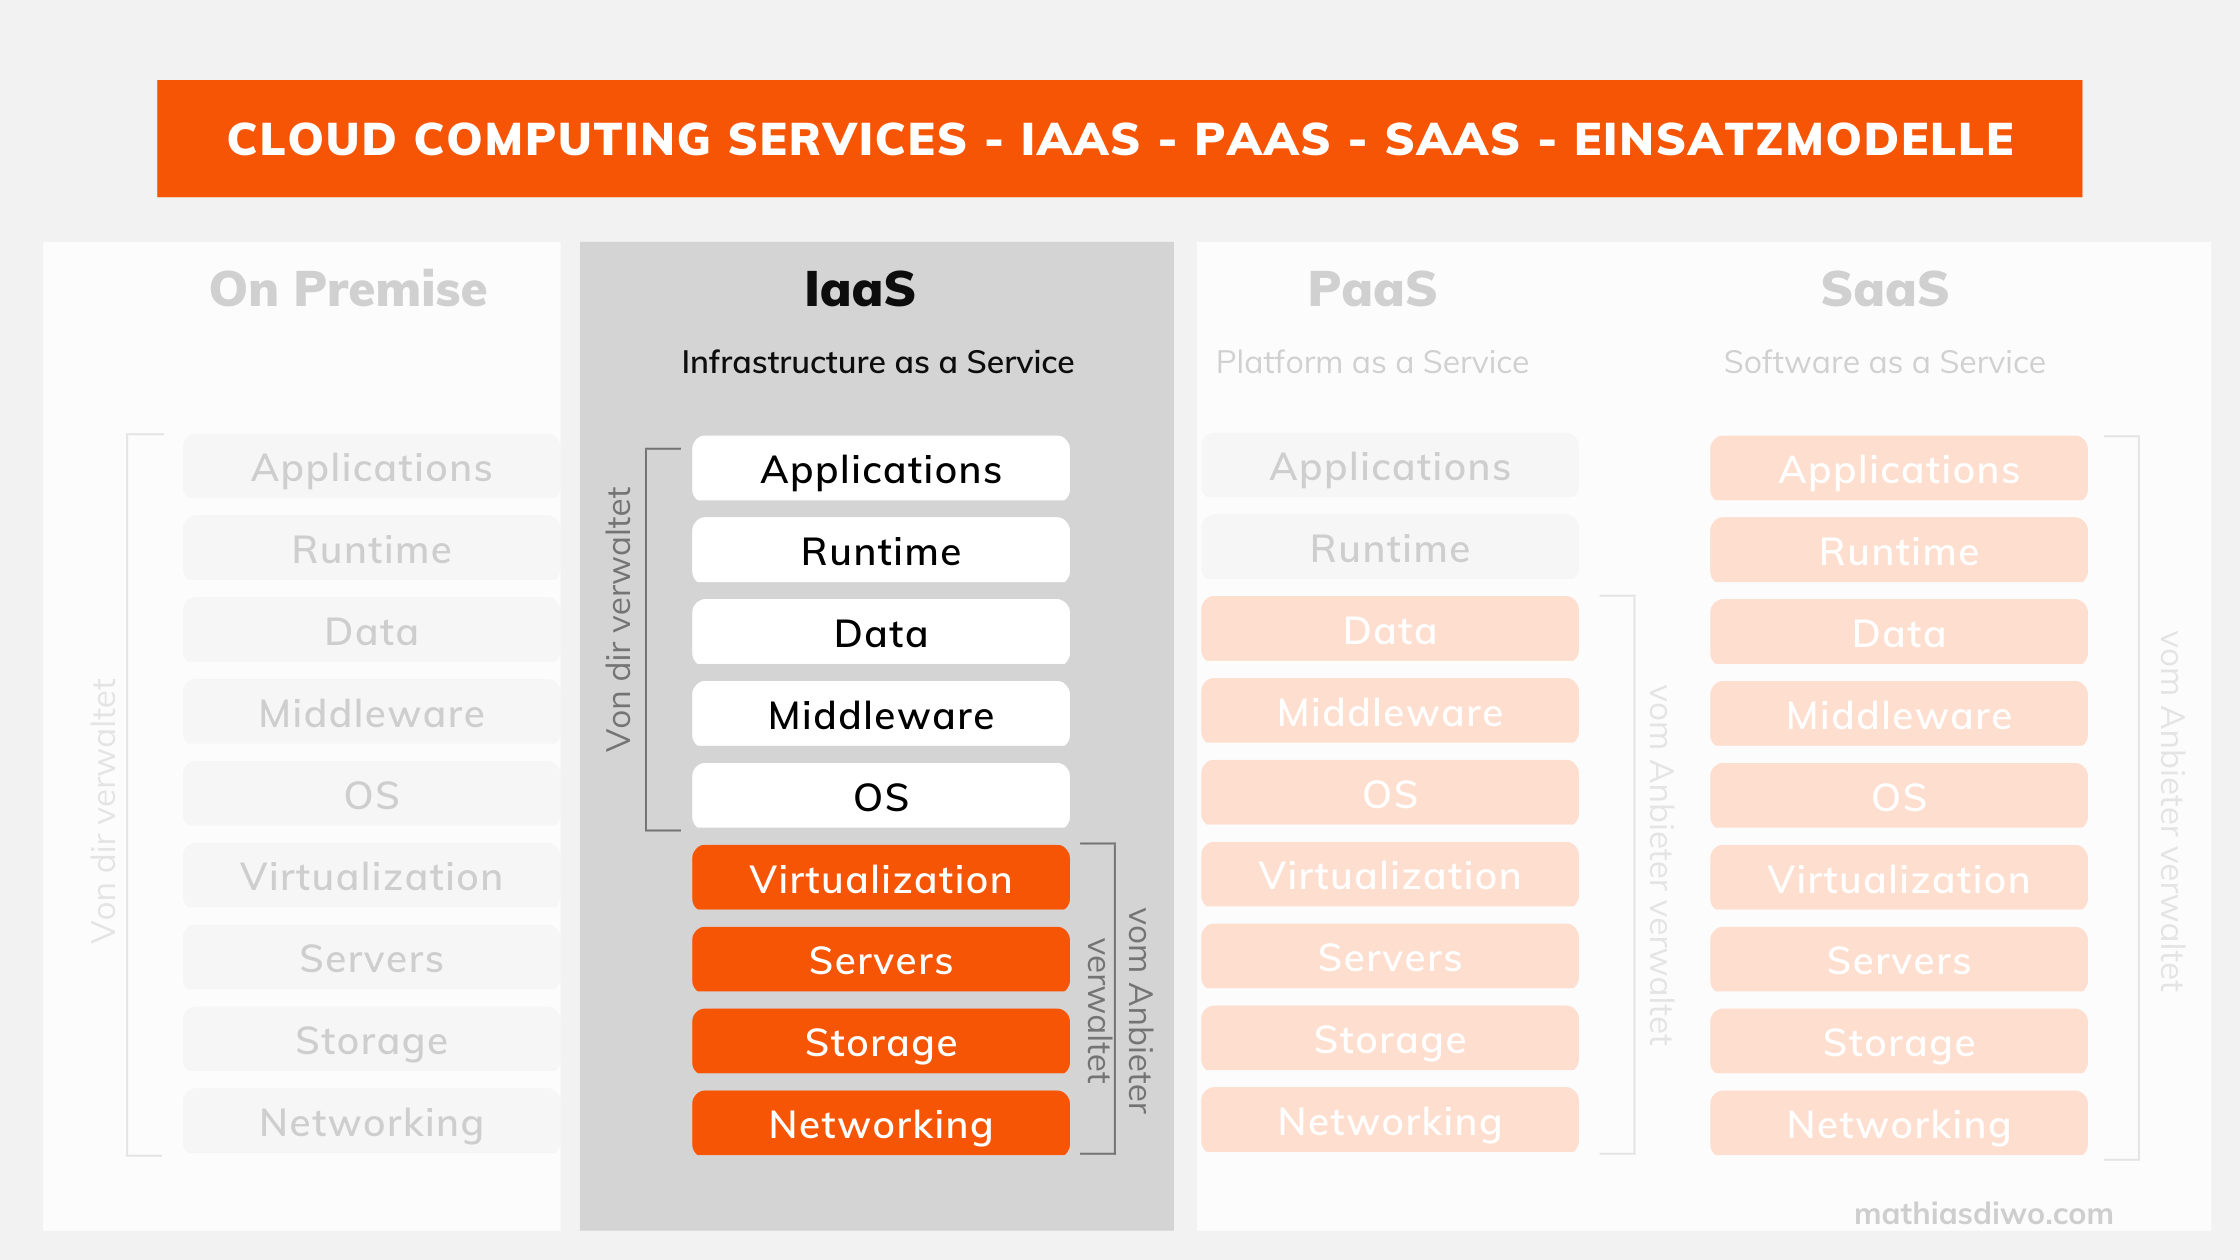 IaaS - Infrastructure as a Service - Cloud Computing